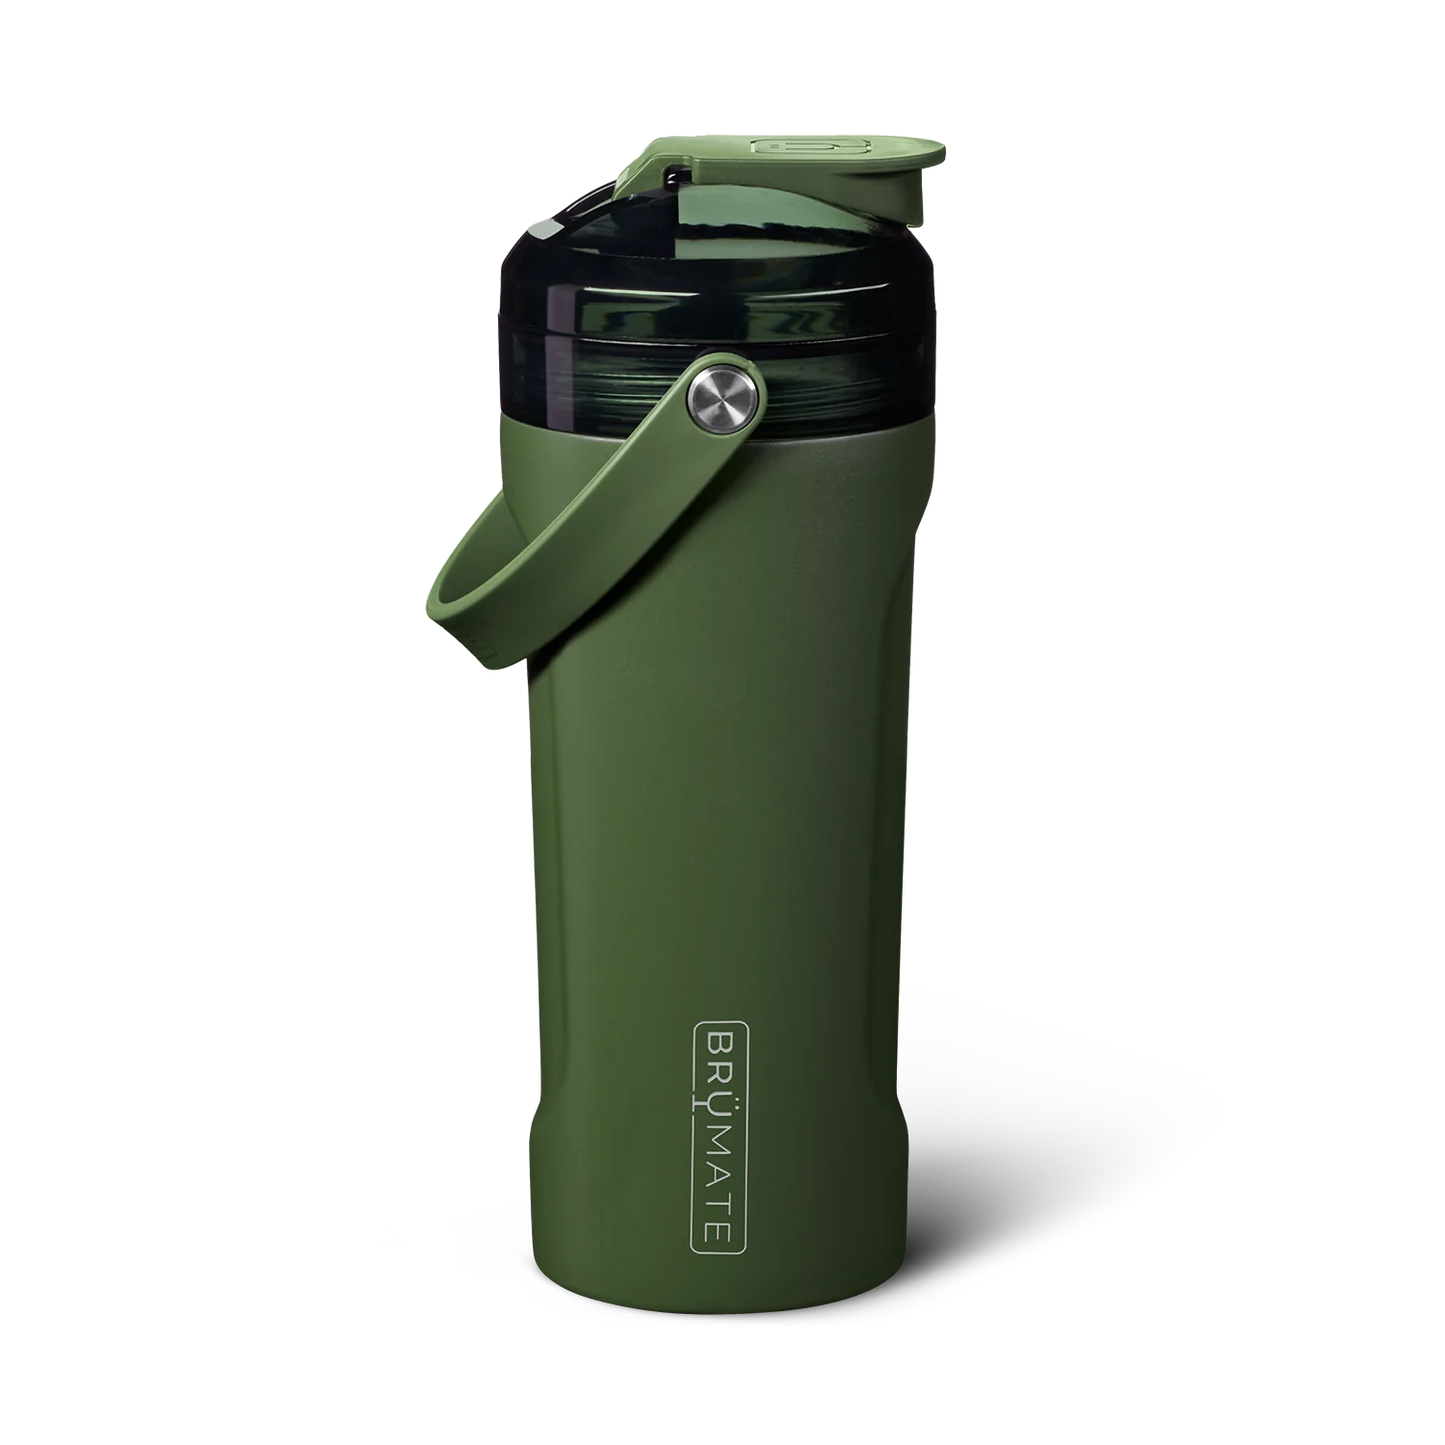 The MultiShaker is made for elevating your fitness journey. Our built-in patent-pending agitator blends your shakes, greens, and powders without any clumps, while also serving as a water infuser for herbs and fruits. It includes our BevGuard™ insulation to keep ice for 24+ hours, a spill-proof MagFlip™ lid, volume markings on the inside, a durable silicone handle, a non-slip base, and the ability to interchange tops with our MÜV or Straw Lids, making it perfect for any workout or adventure.(Od Green)